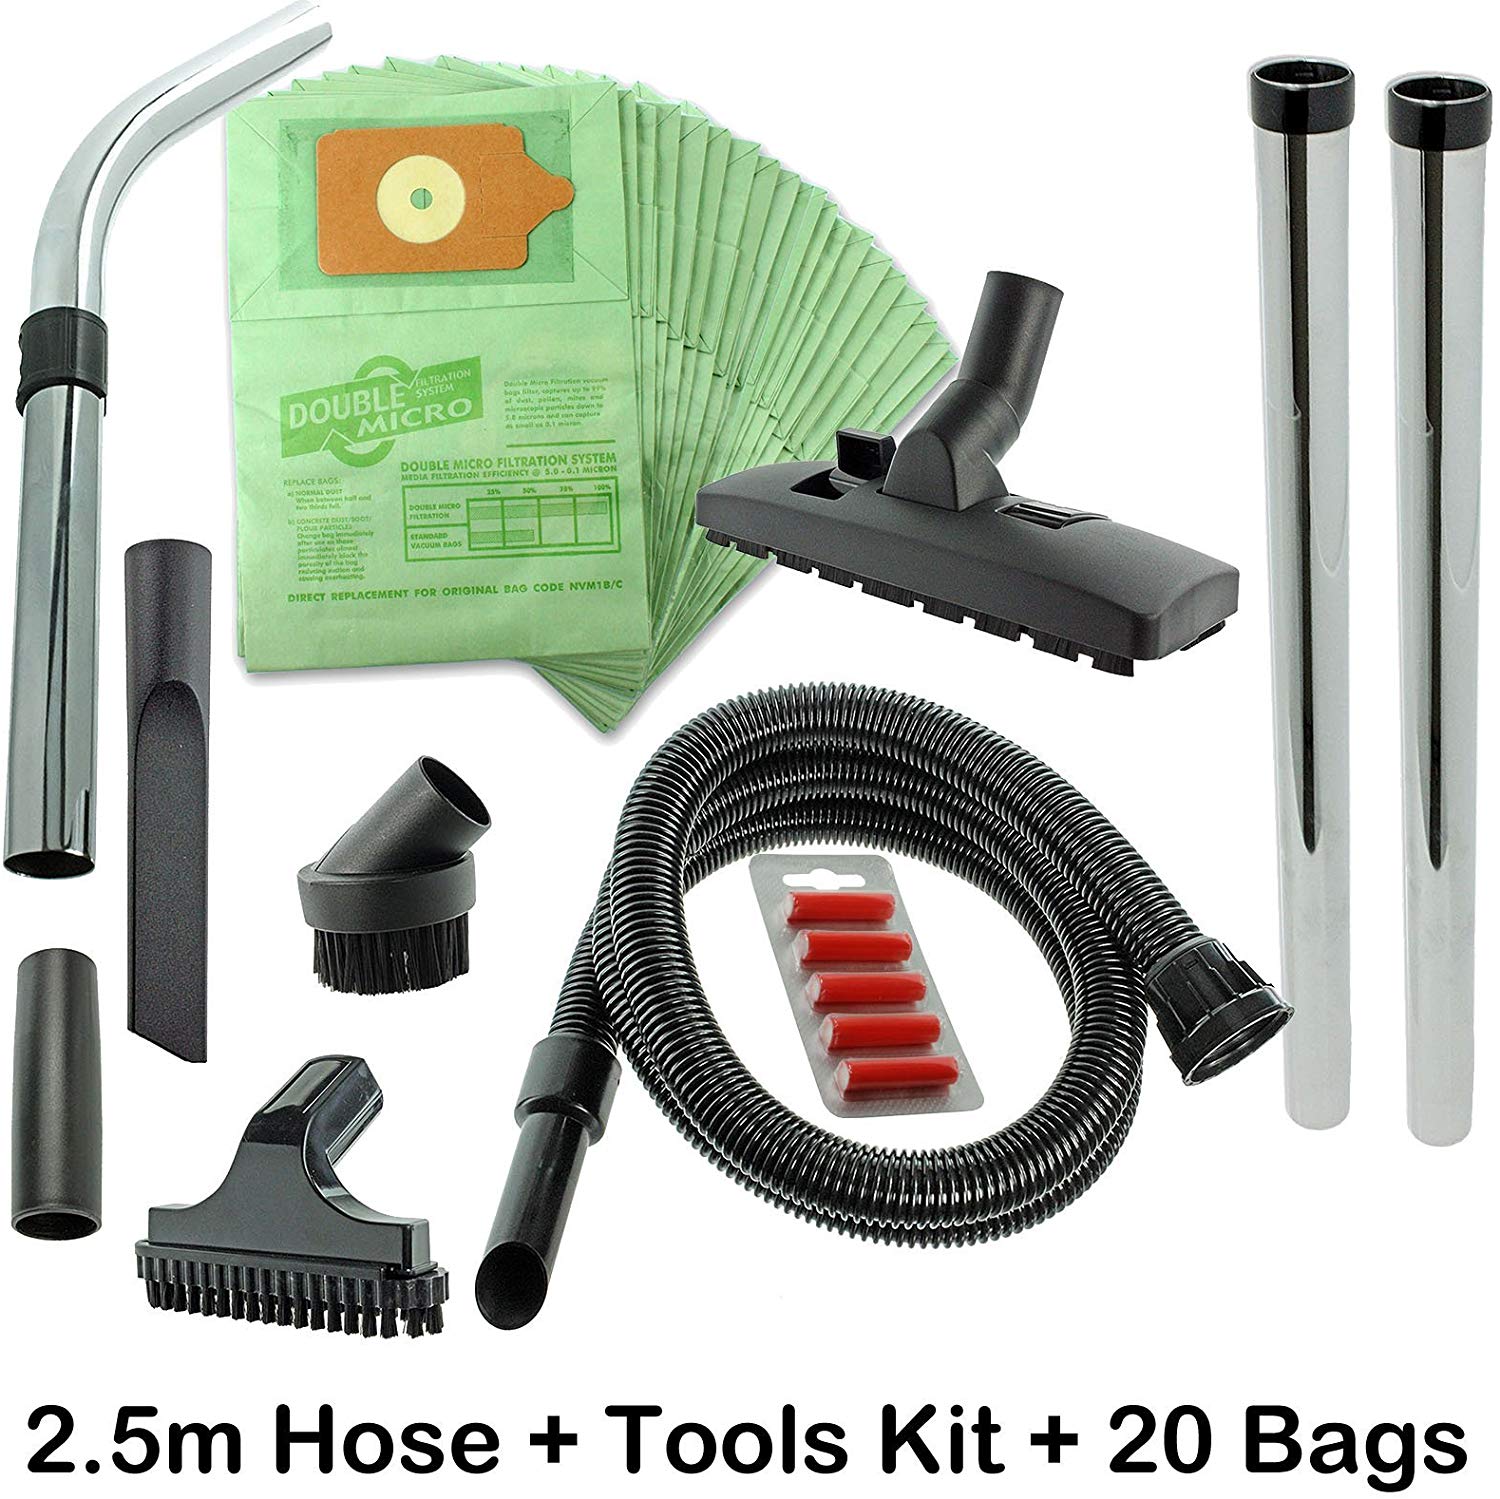 SPARES2GO Spare Parts Tool Kit for Numatic Henry Hetty James Vacuum Hoover + 20 Dust Bags + 5 Fresheners